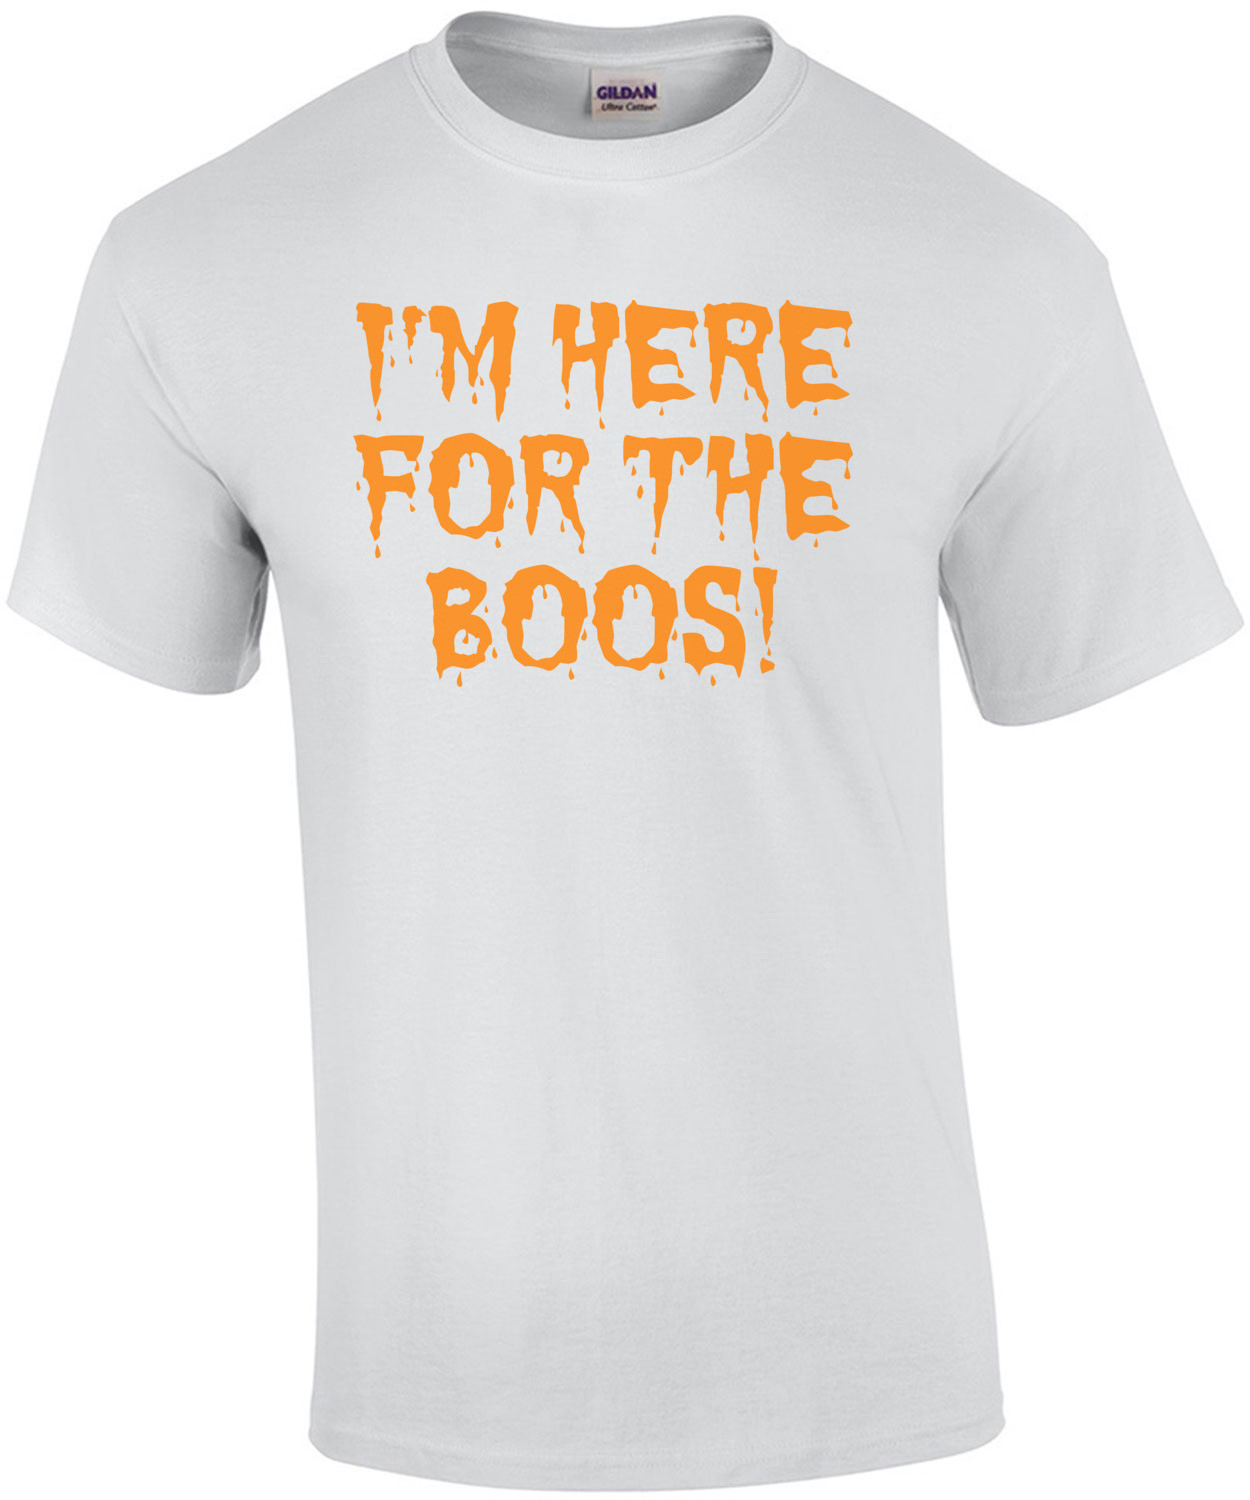 I'M HERE FOR THE BOOS! FUNNY HALLOWEEN